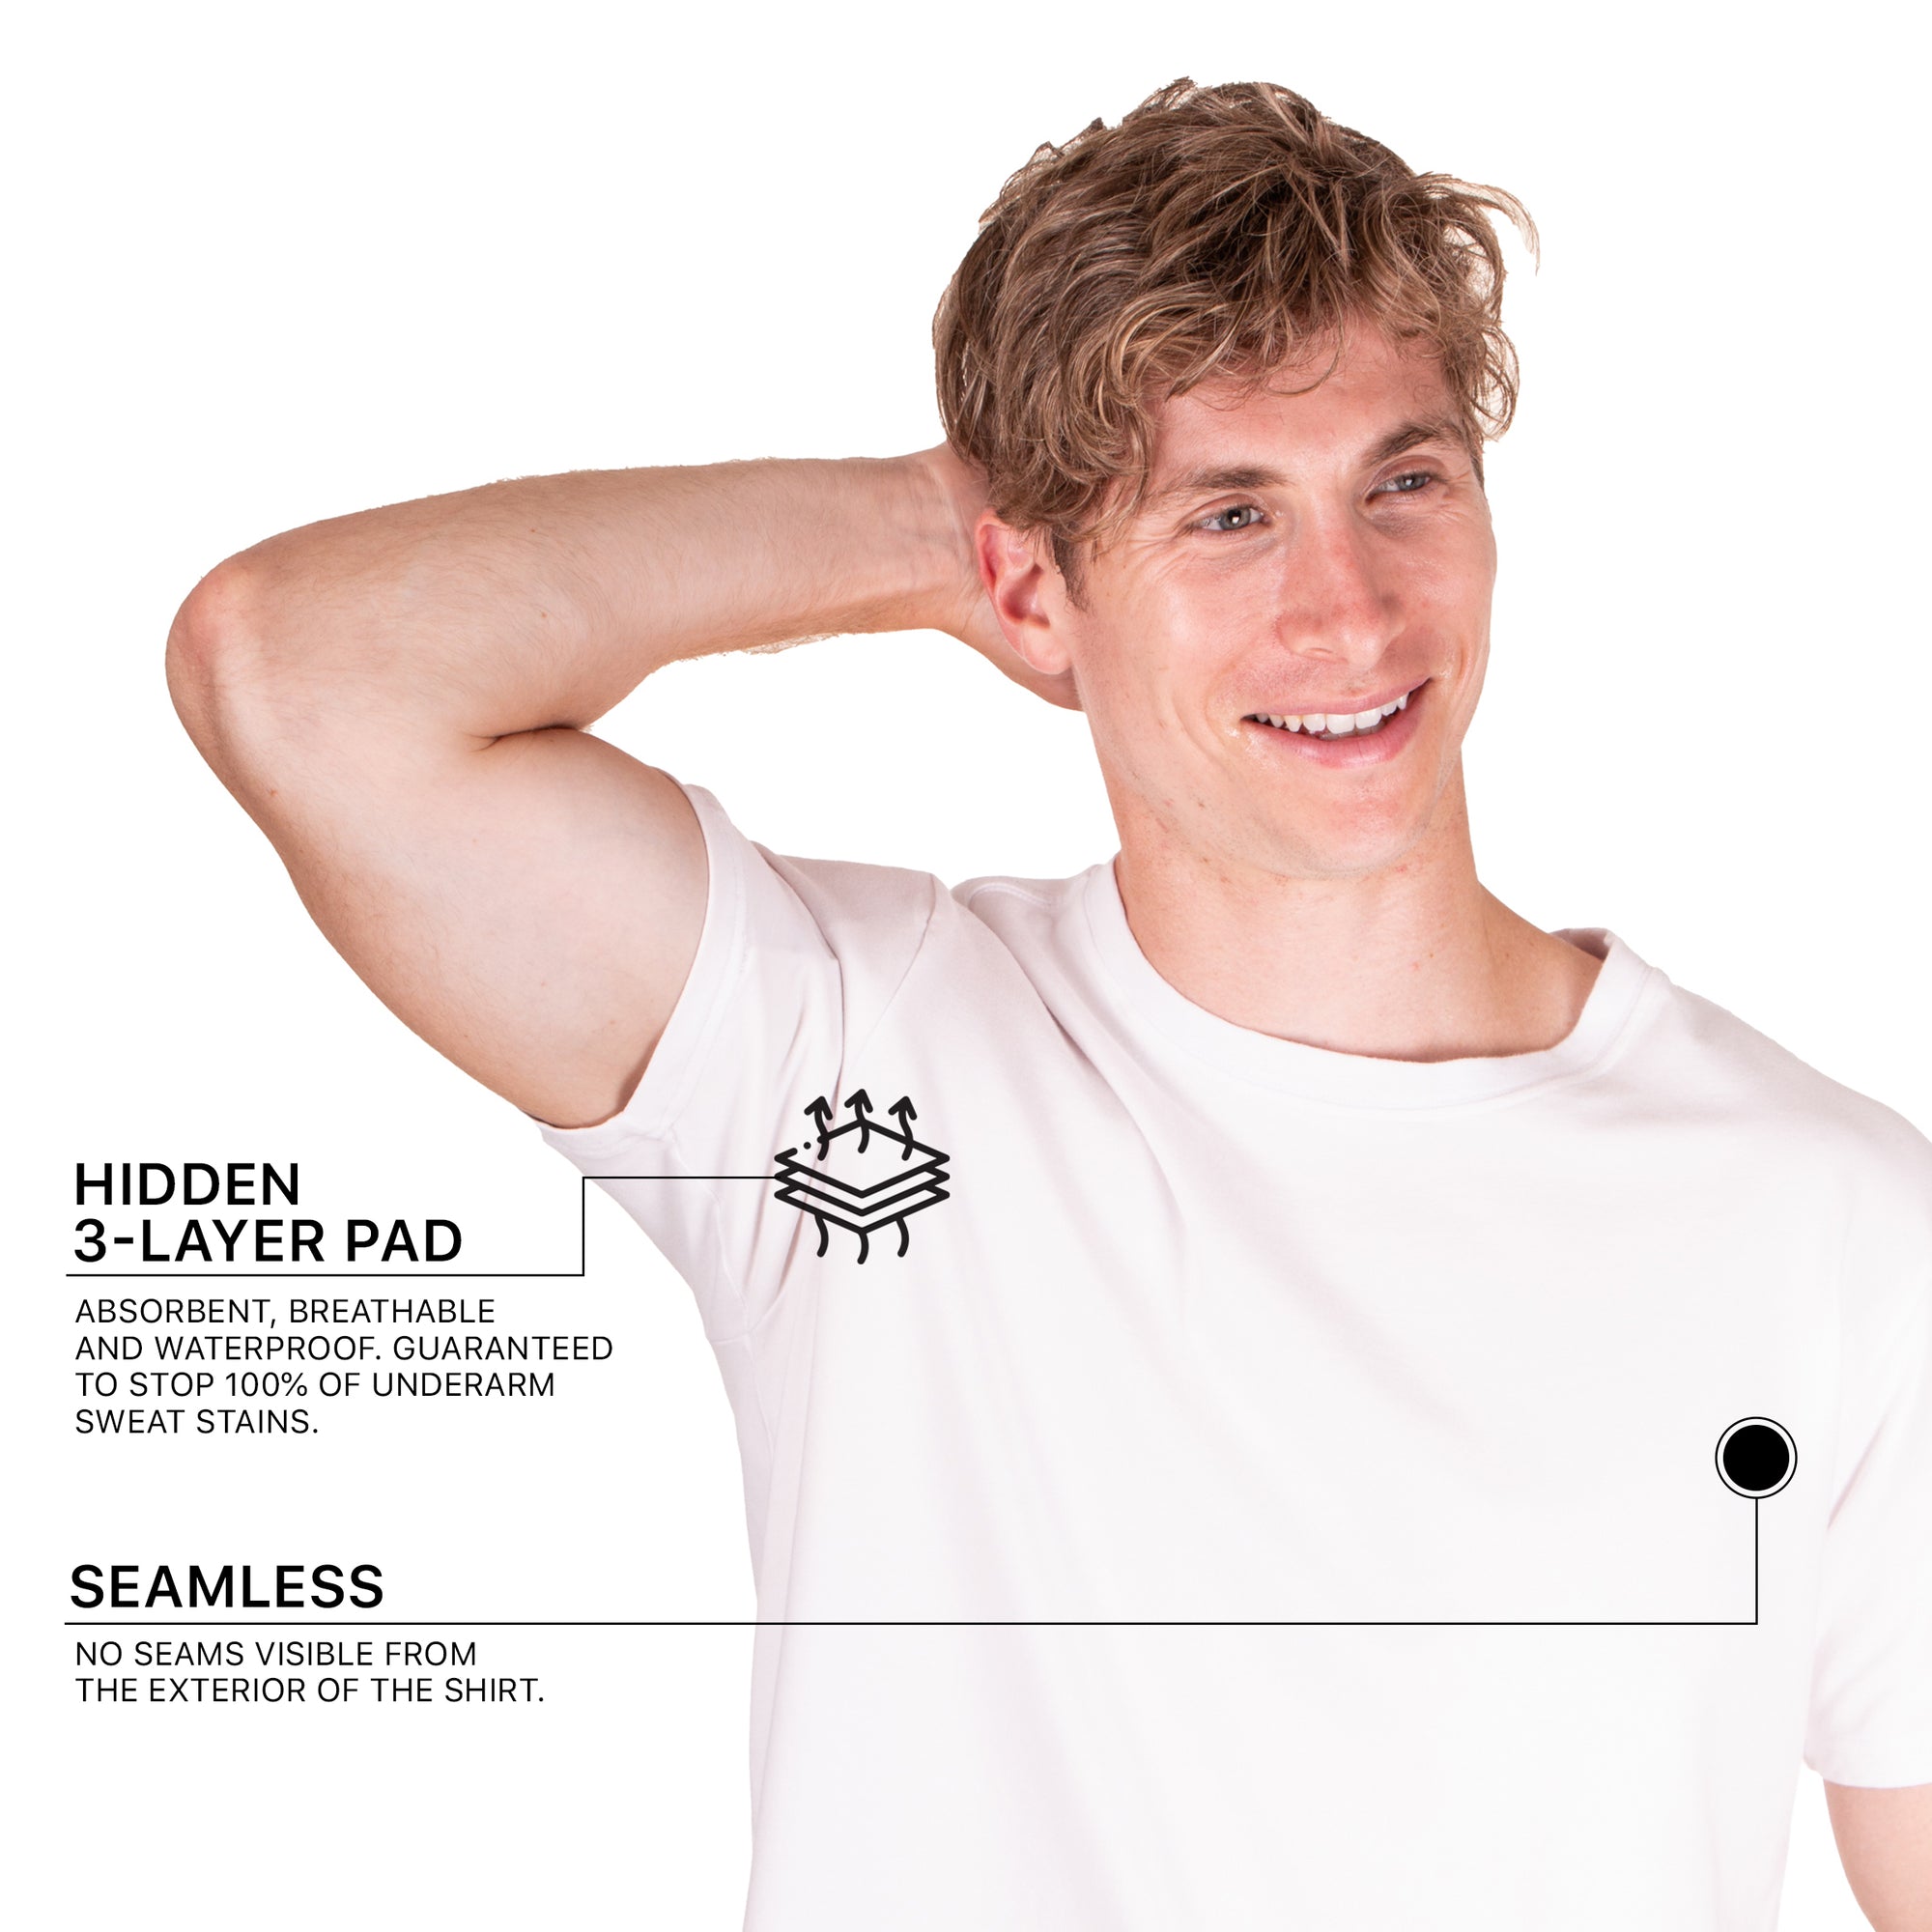 Infographic about how anti-sweat undershirts work